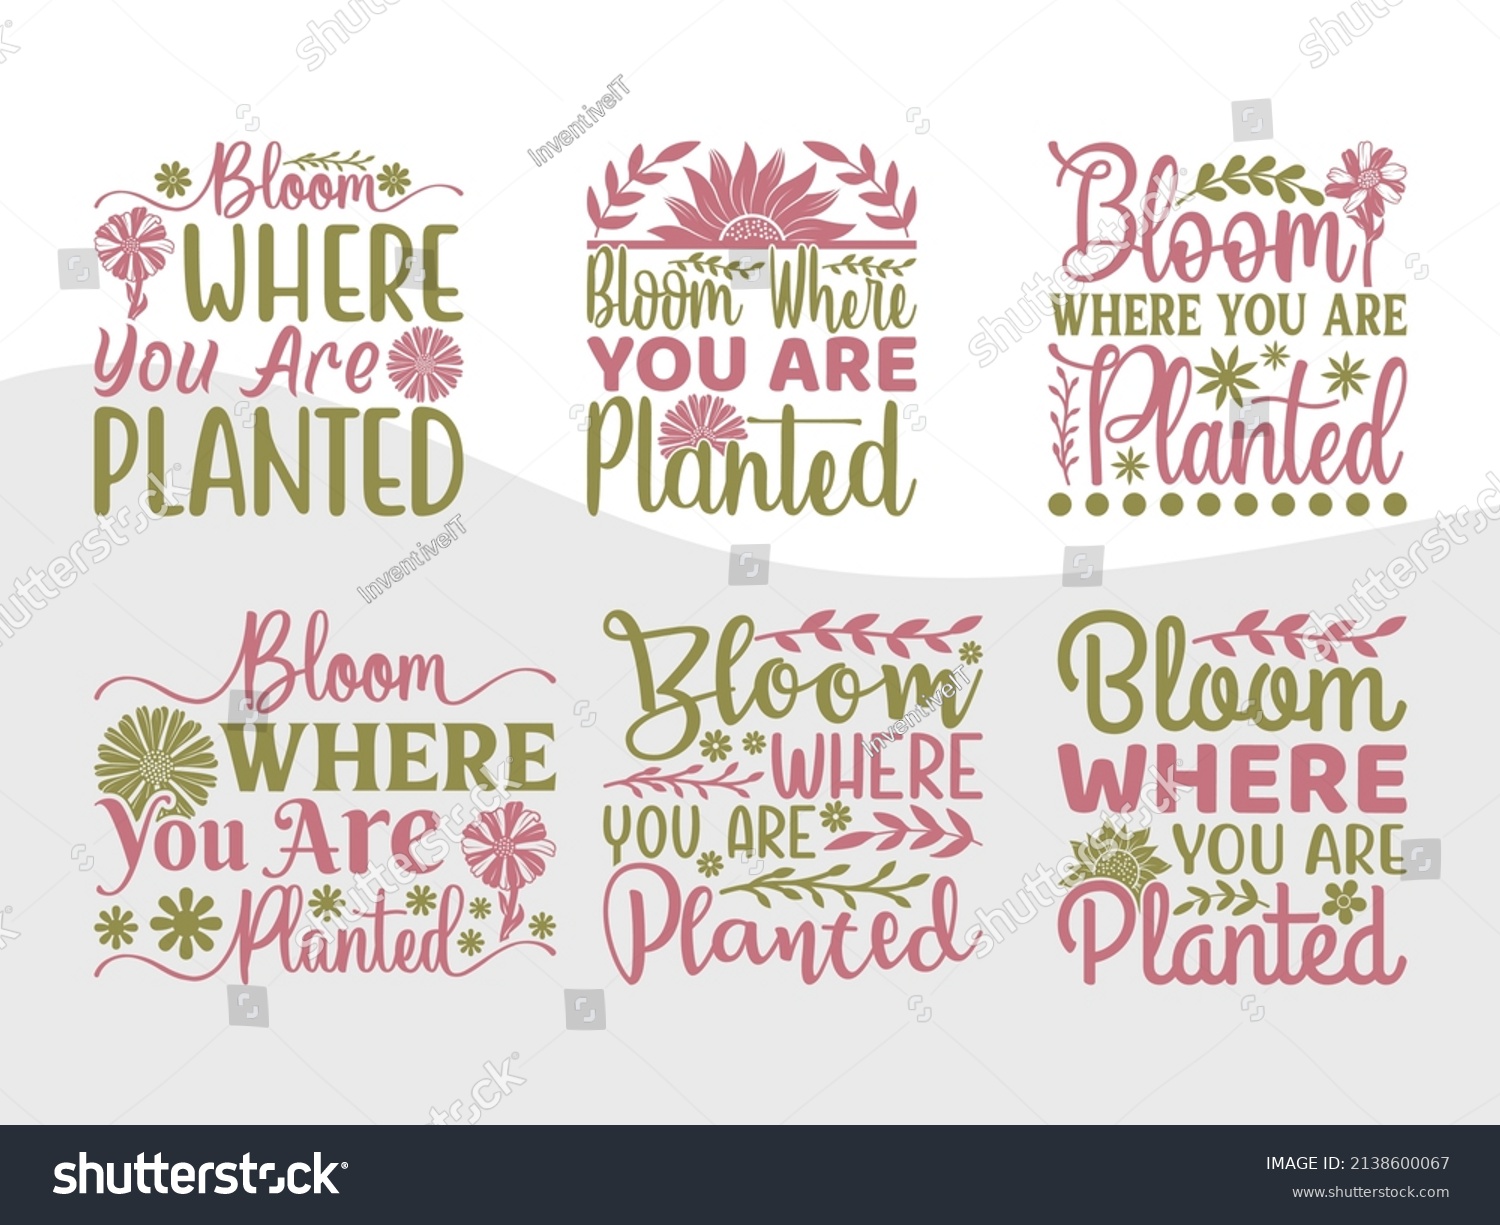 SVG of Bloom Where You Are Planted  Printable Vector Illustration svg